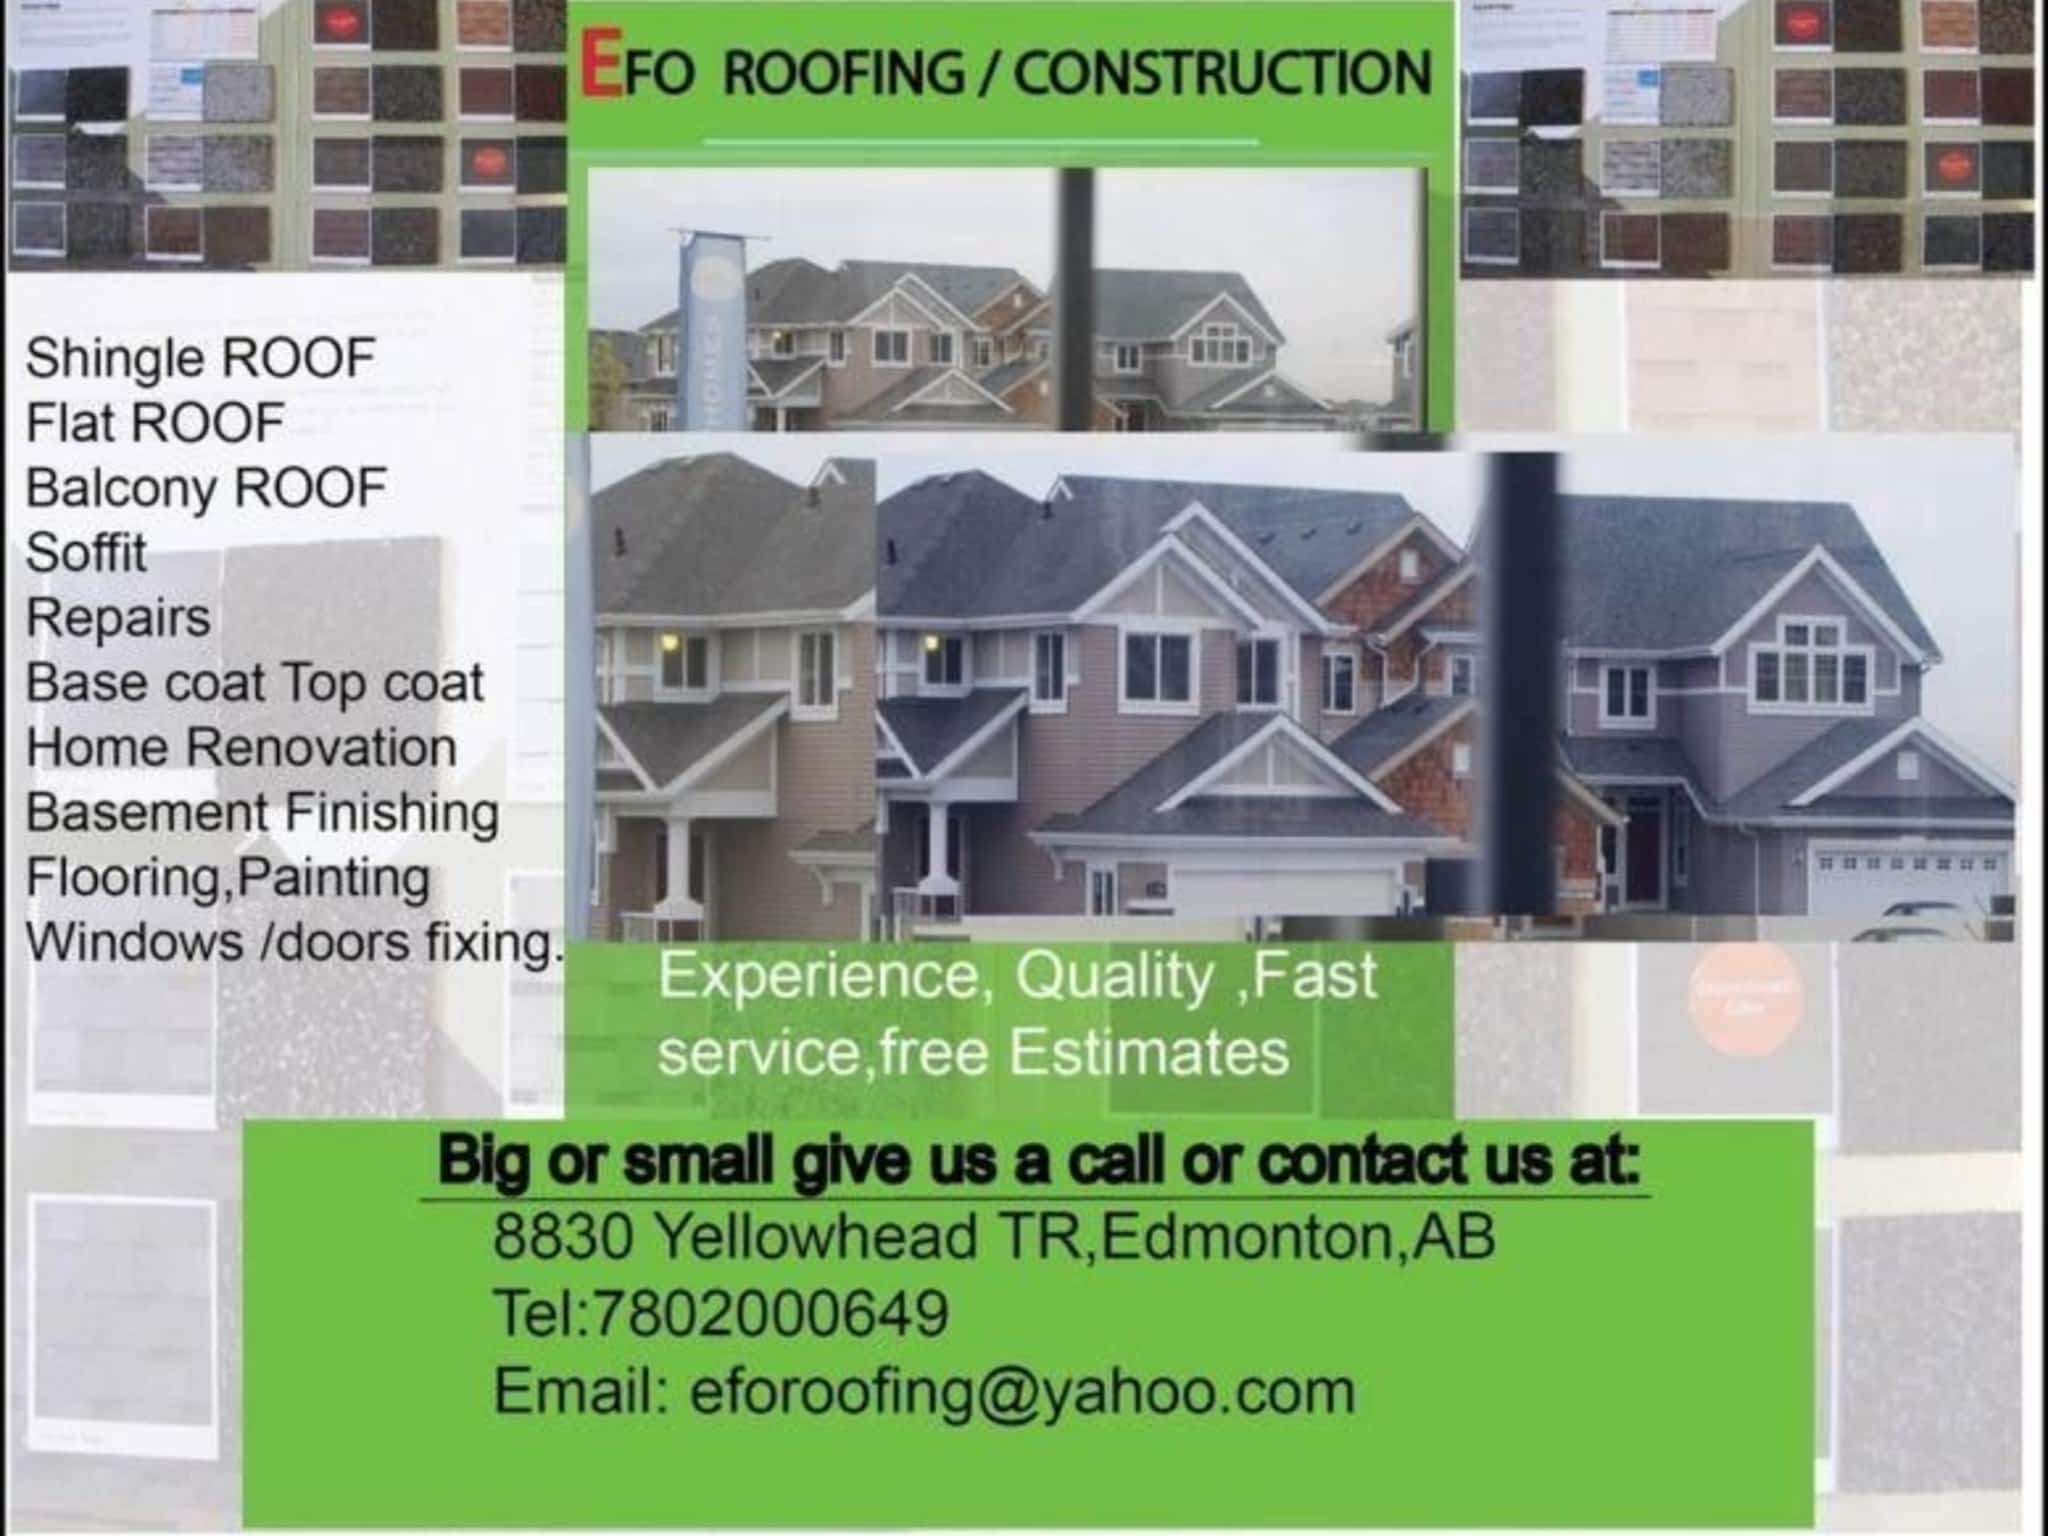 photo EFO Roofing/Construction